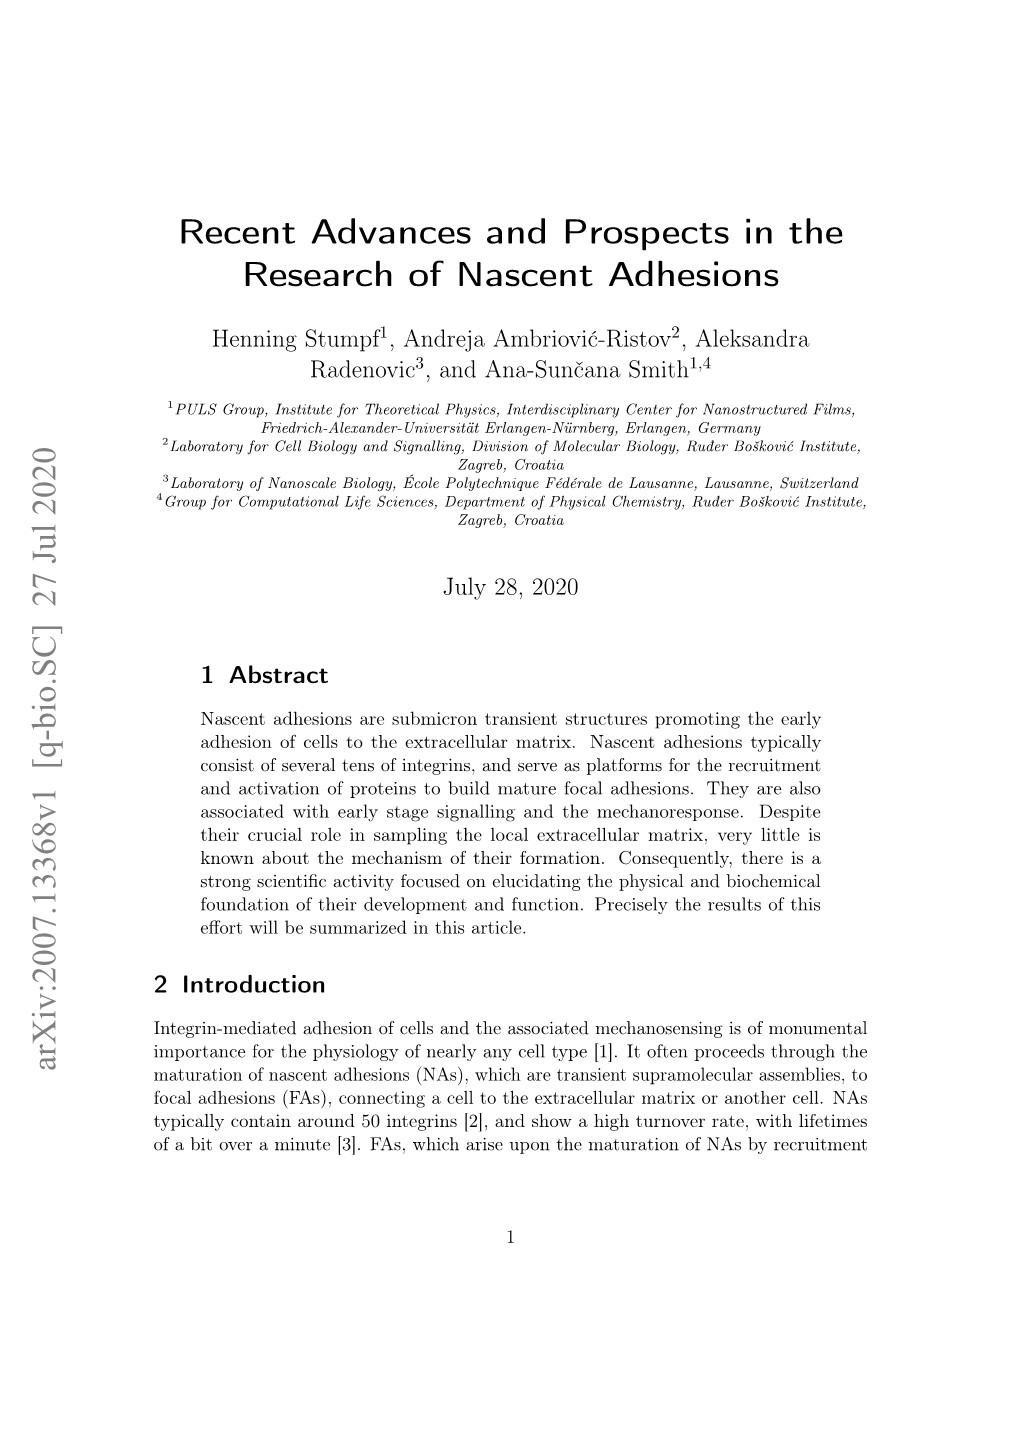 Recent Advances and Prospects in the Research of Nascent Adhesions Arxiv:2007.13368V1 [Q-Bio.SC] 27 Jul 2020